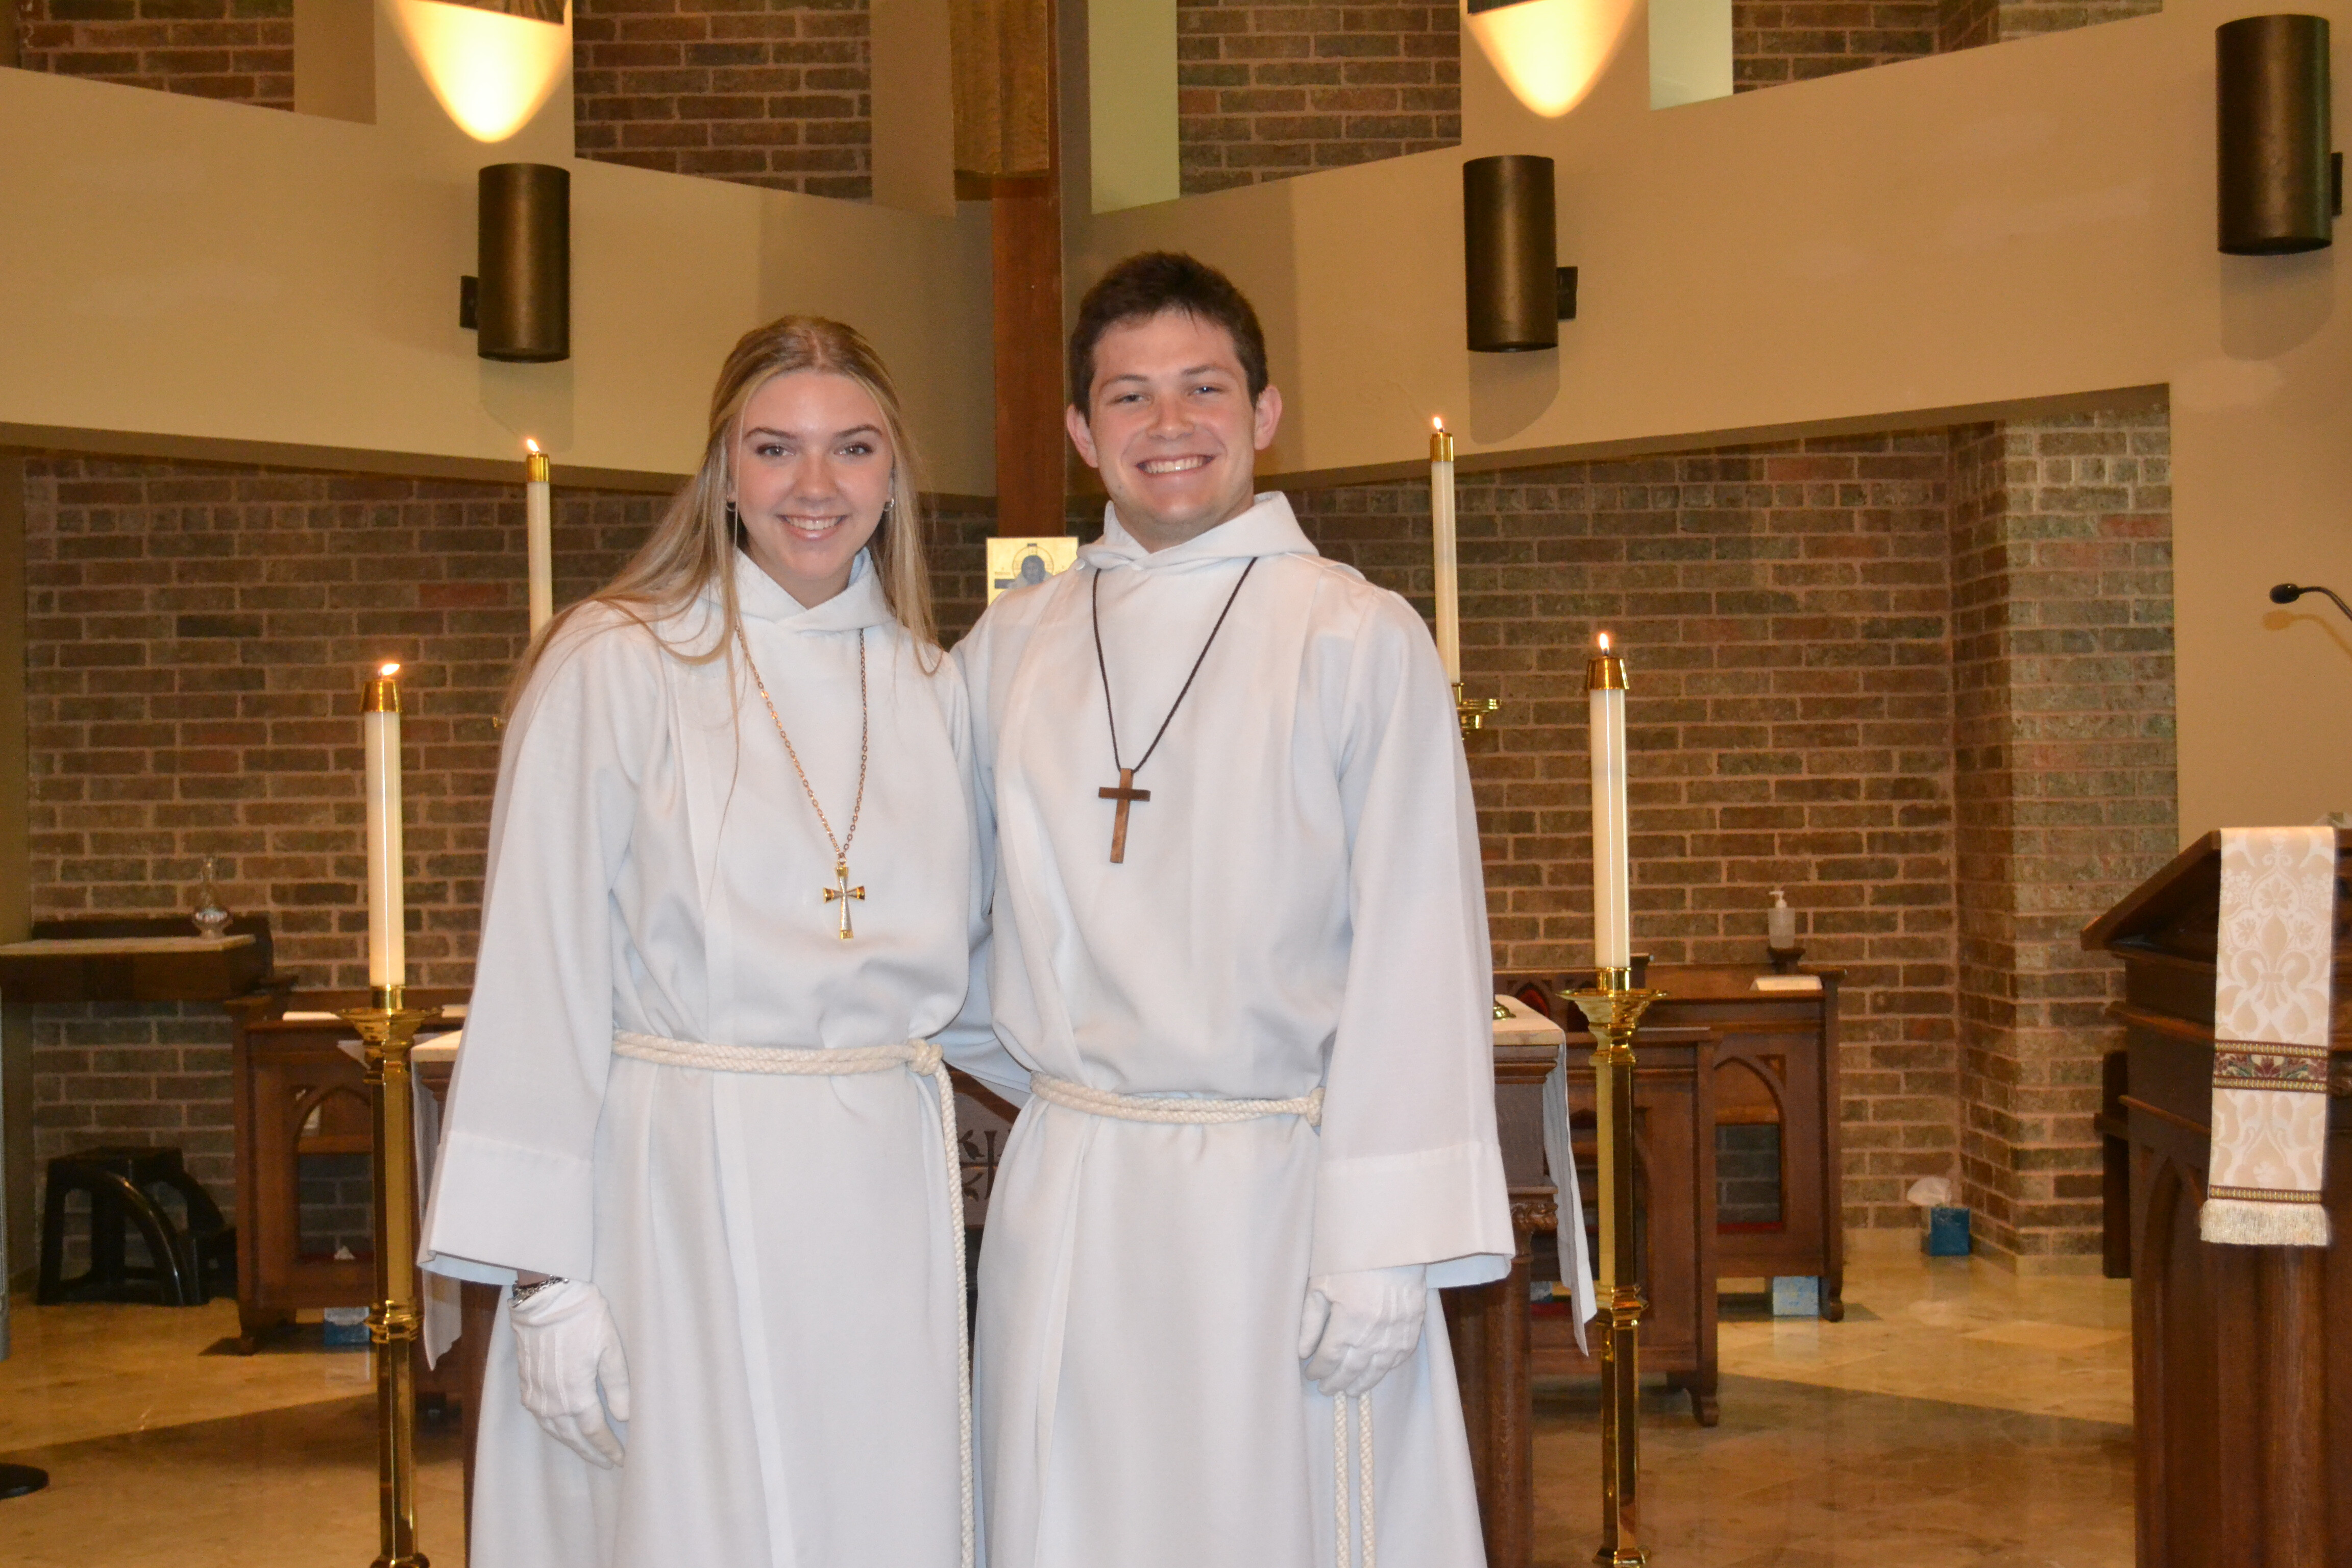 Serving Our Acolytes